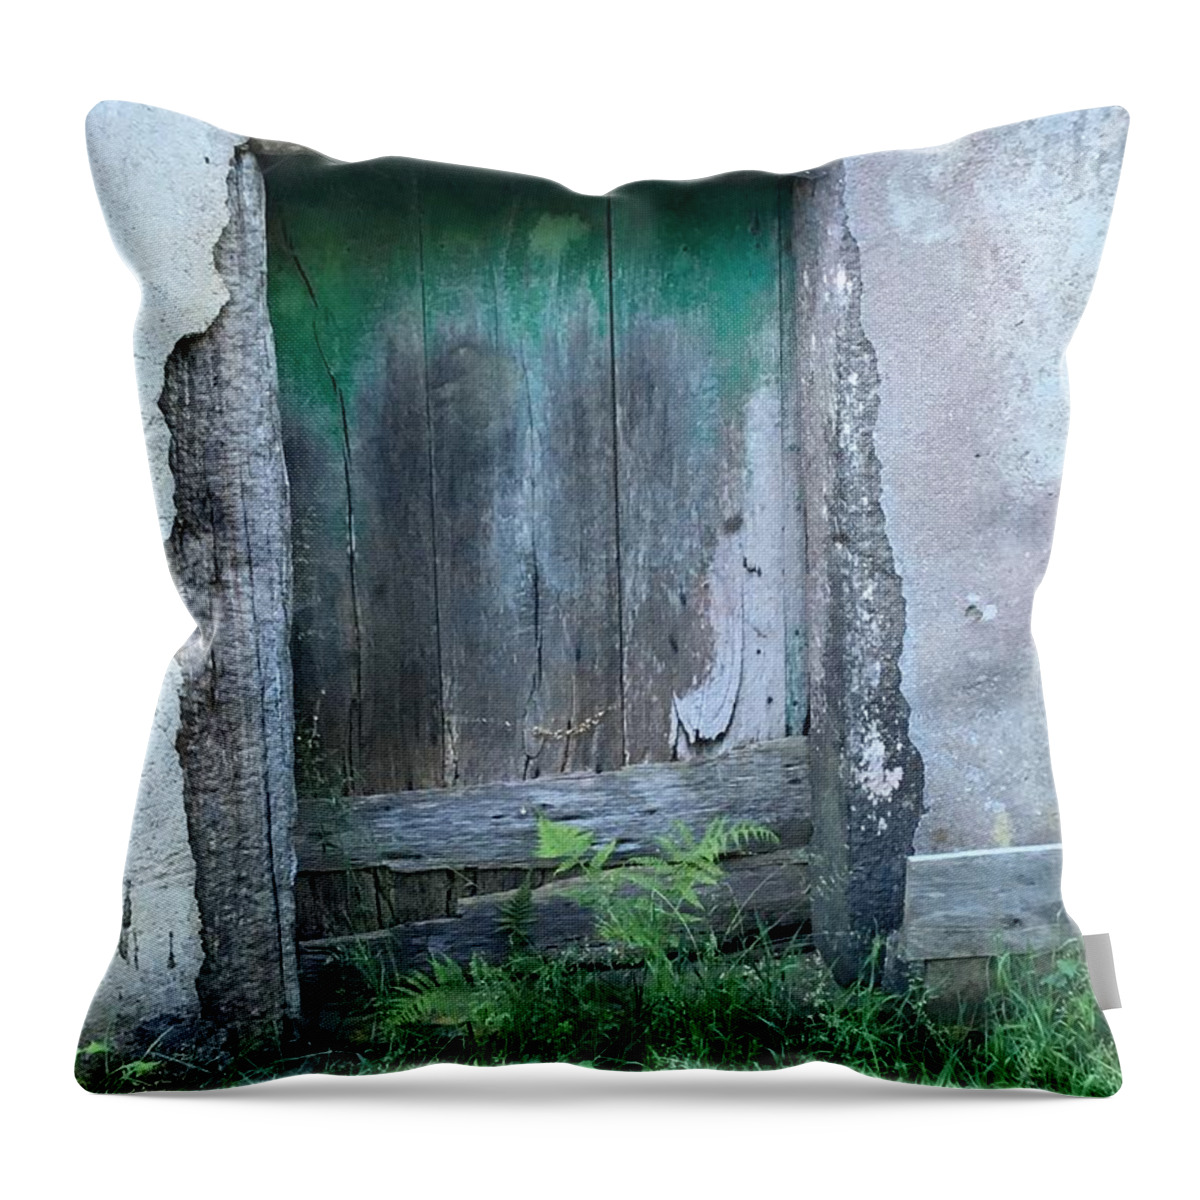 Old Throw Pillow featuring the photograph Spain Door 7 by Cheryl Rhodes